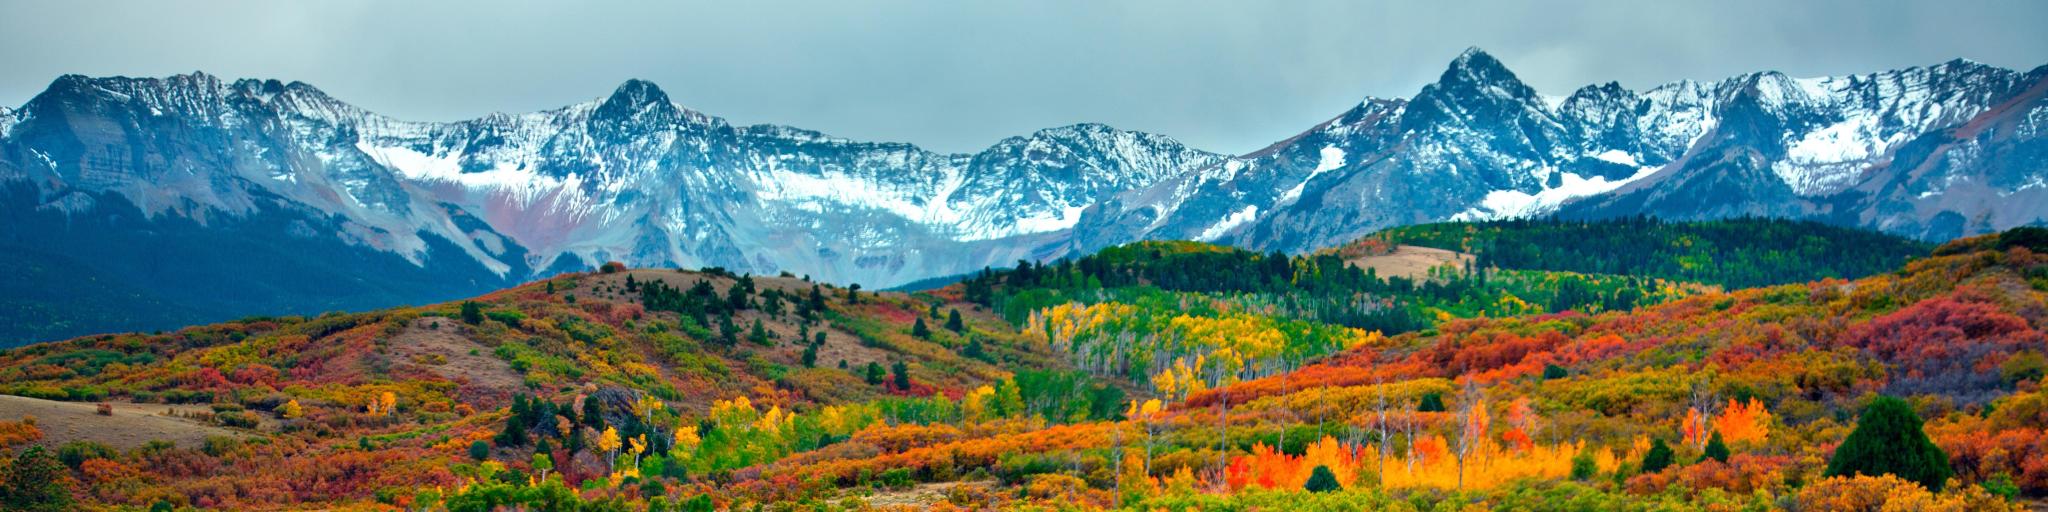 Beautiful view of Colorado in Autumn